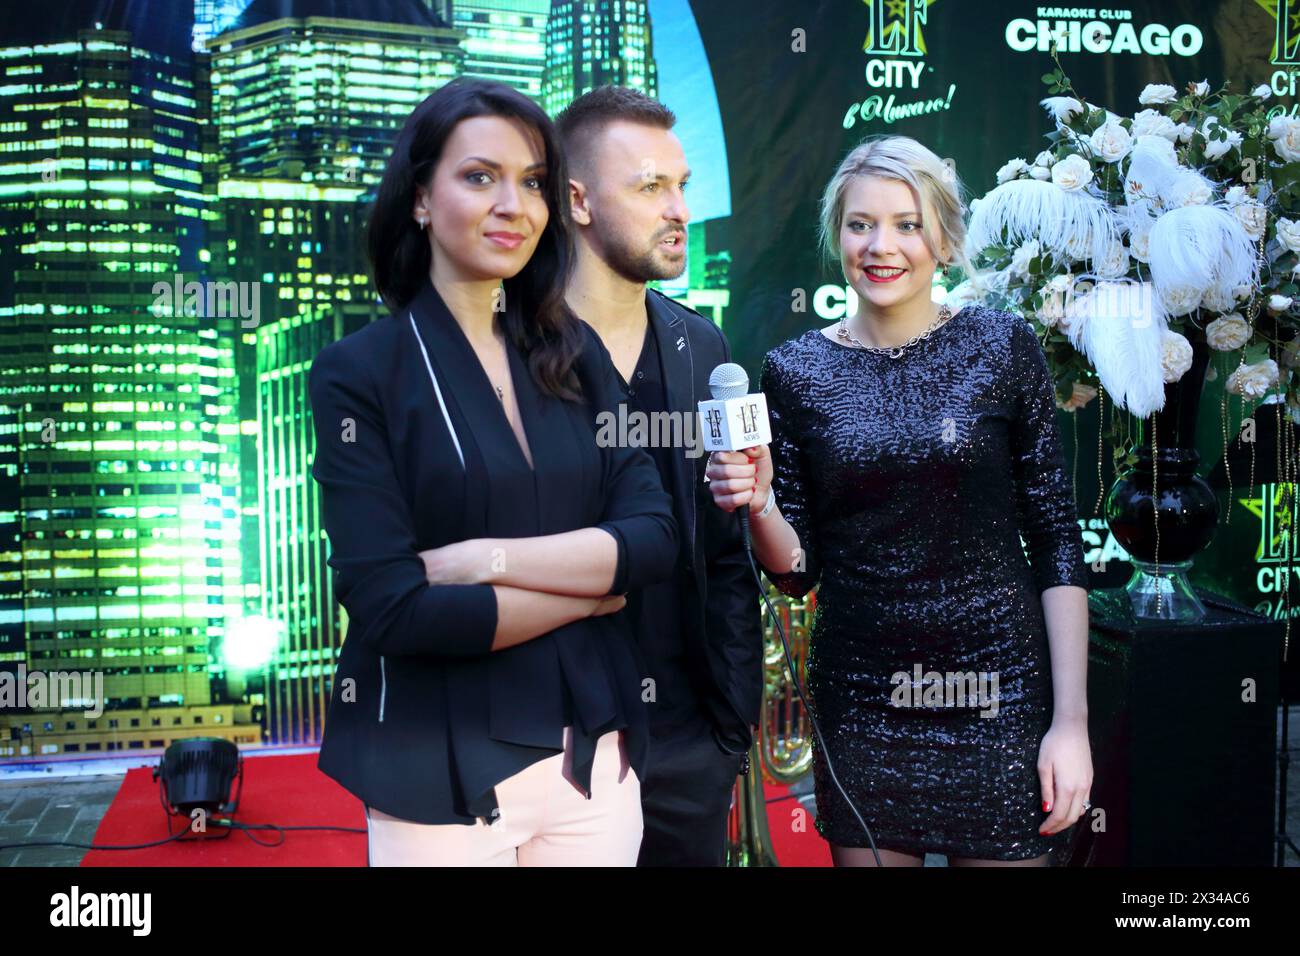 MOSCOW - APR 26, 2015: Group Yin-Yang at a party in honor of the birthday the glossy magazine LF city in karaoke club Chicago Stock Photo